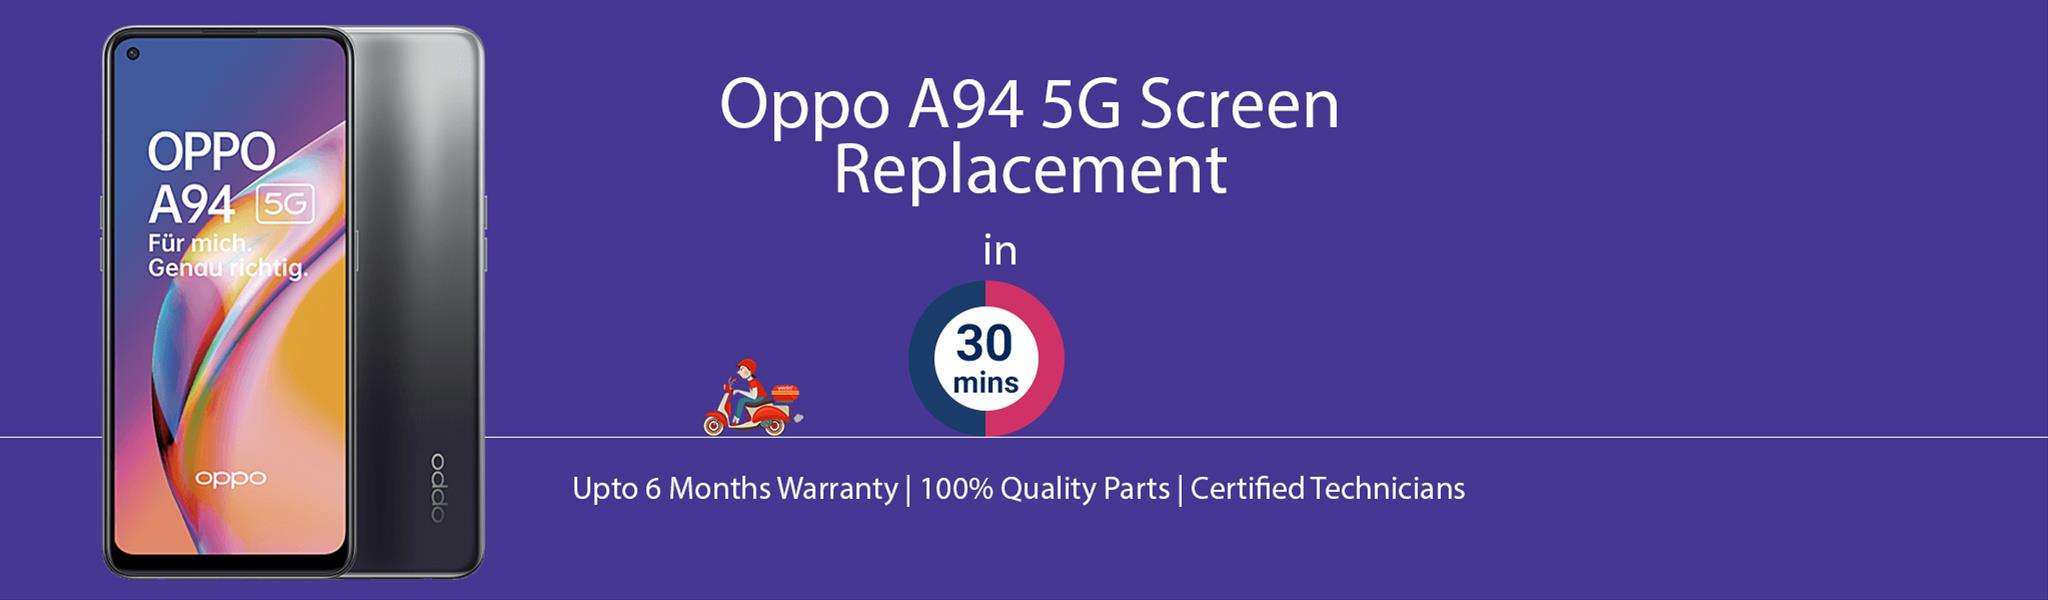 oppo-a94-5g-screen-replacement.jpg